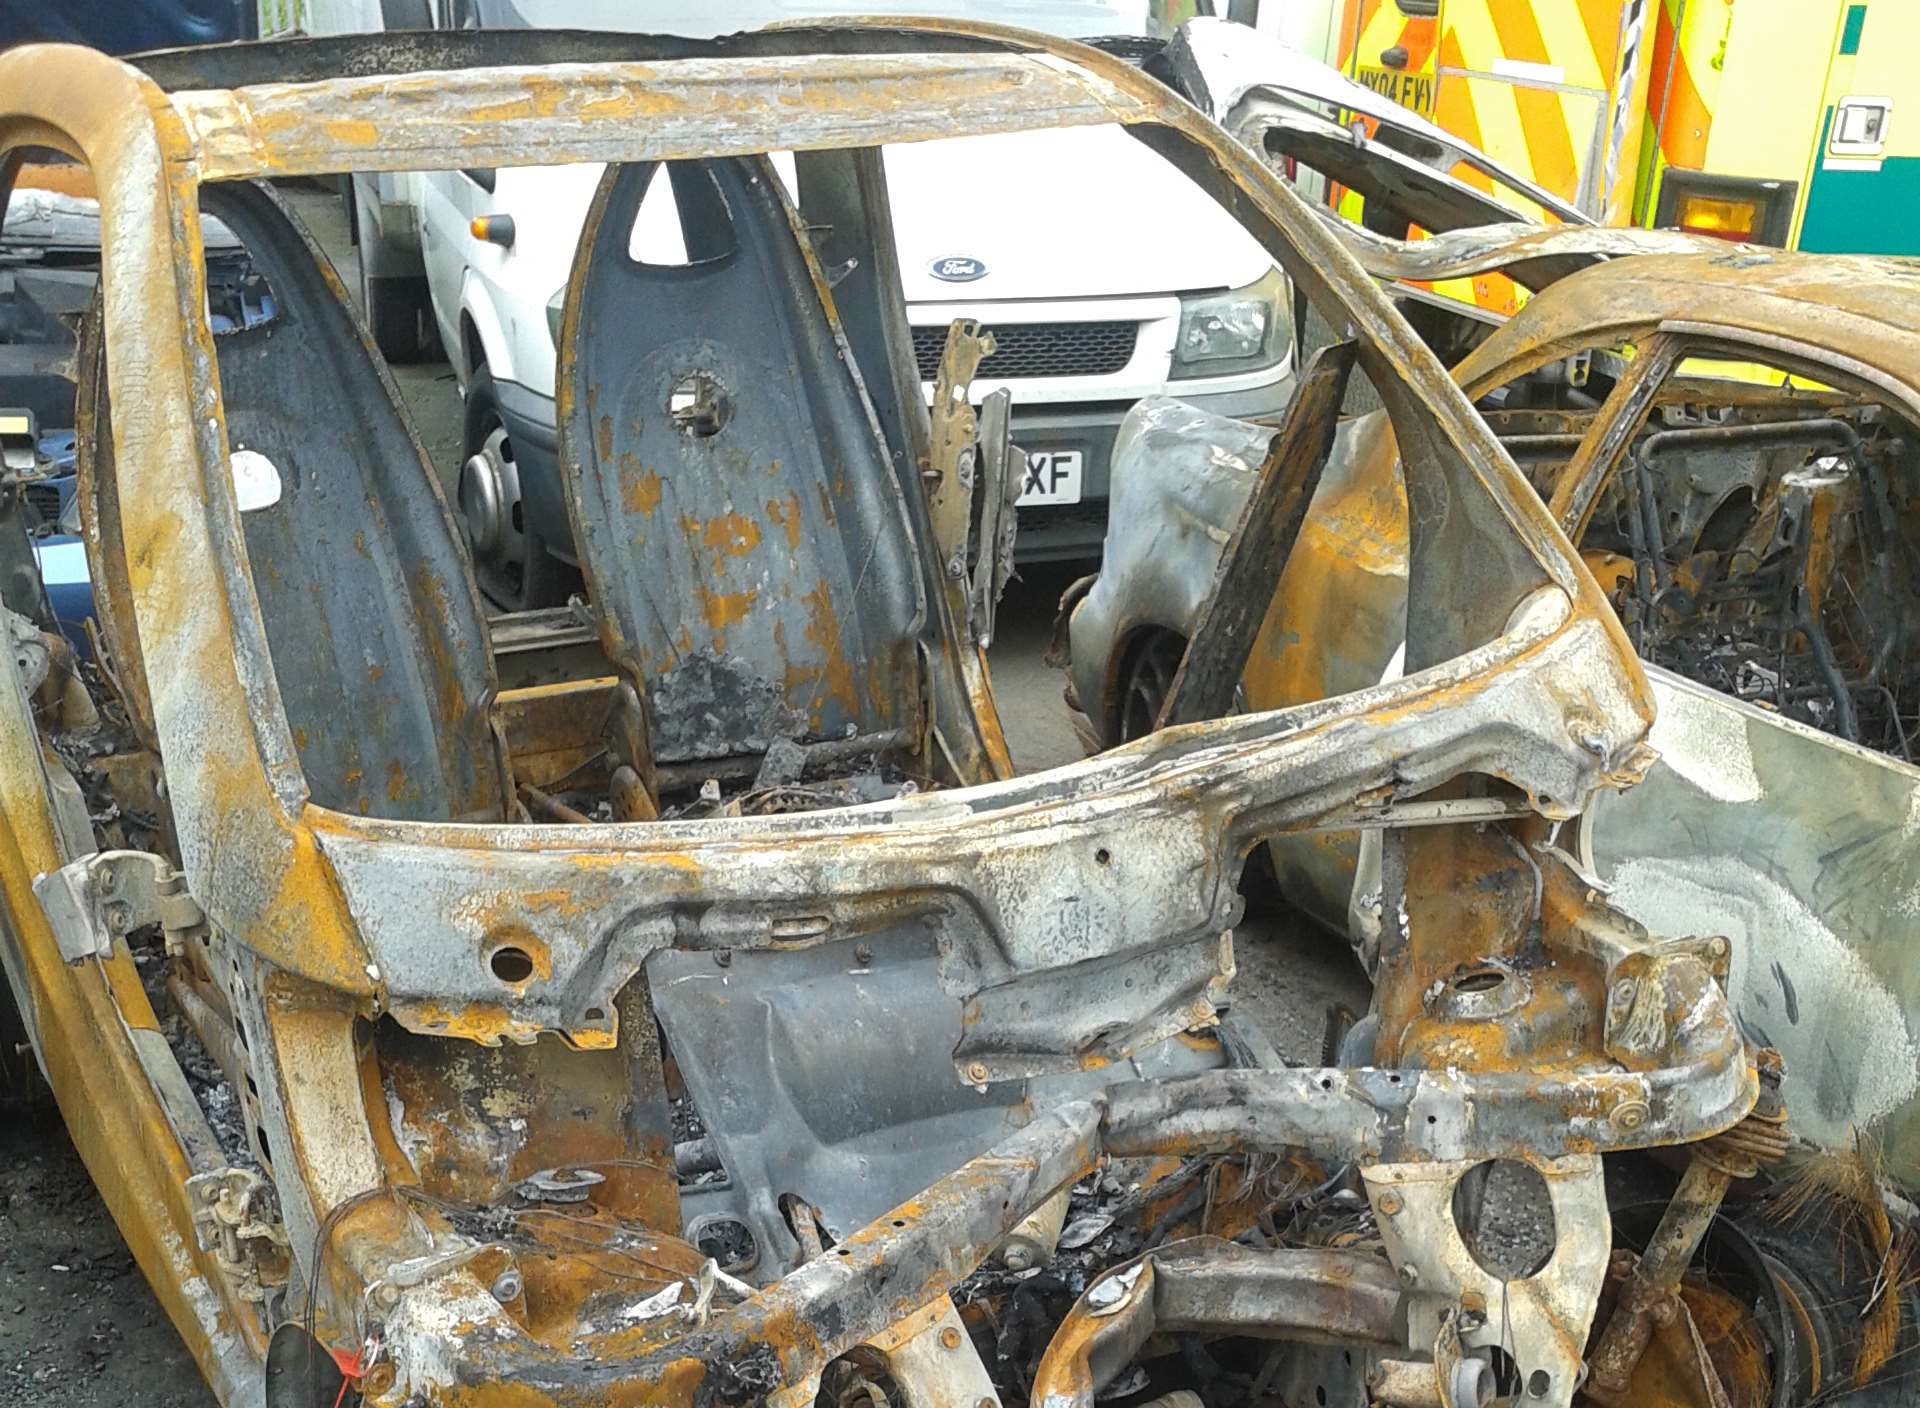 The burnt out car which was later found in Queenborough, Sheppey